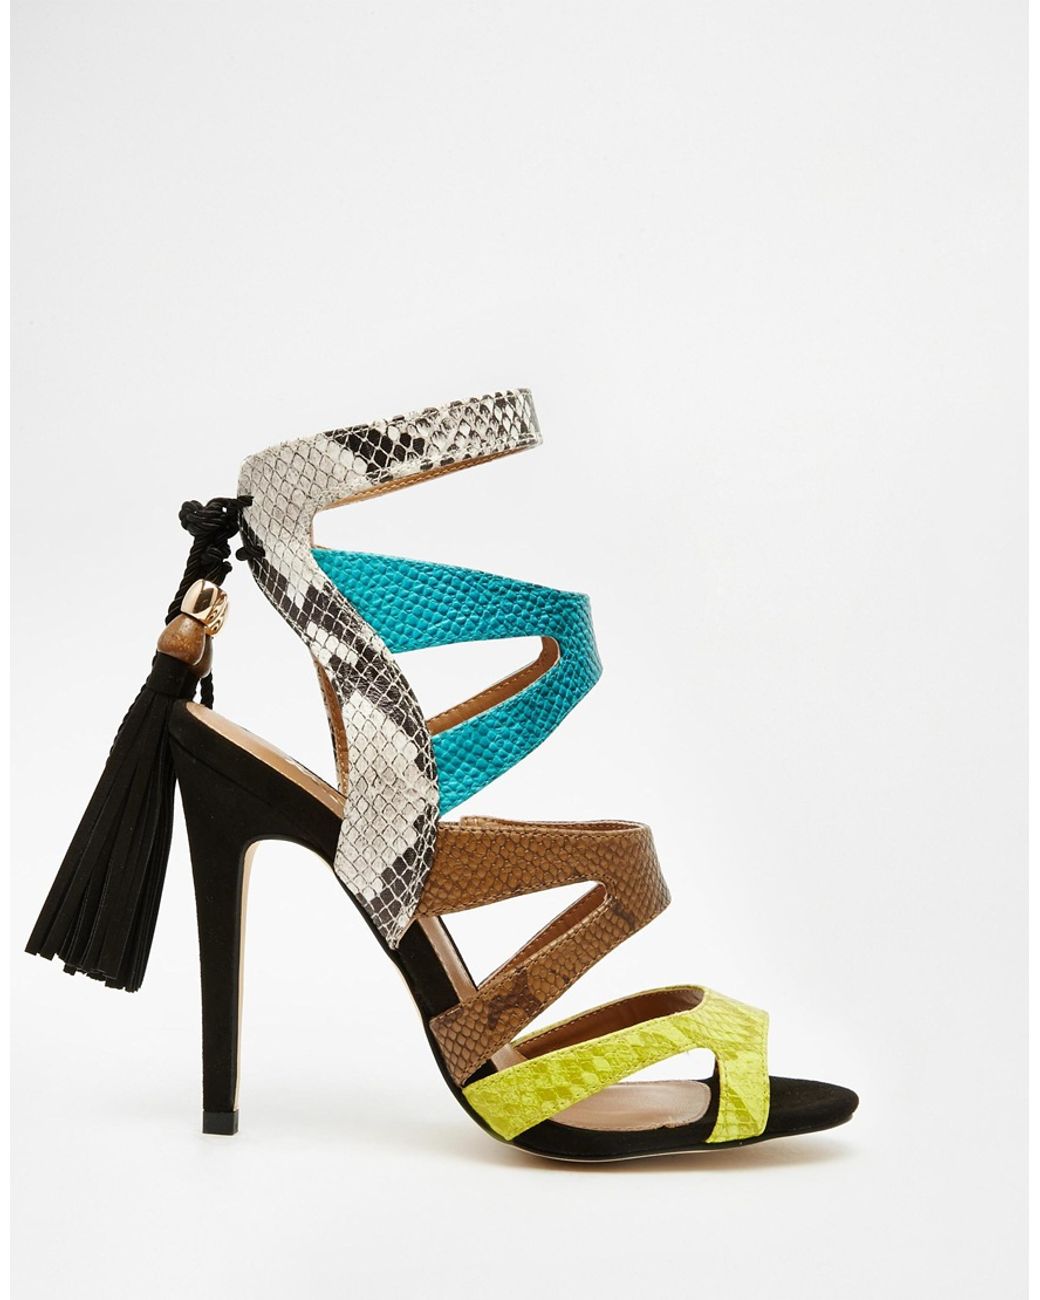 Miss KG Embellished Jelly Sandals from ASOS | Silver block heel sandals,  Jelly sandals, Jelly shoes